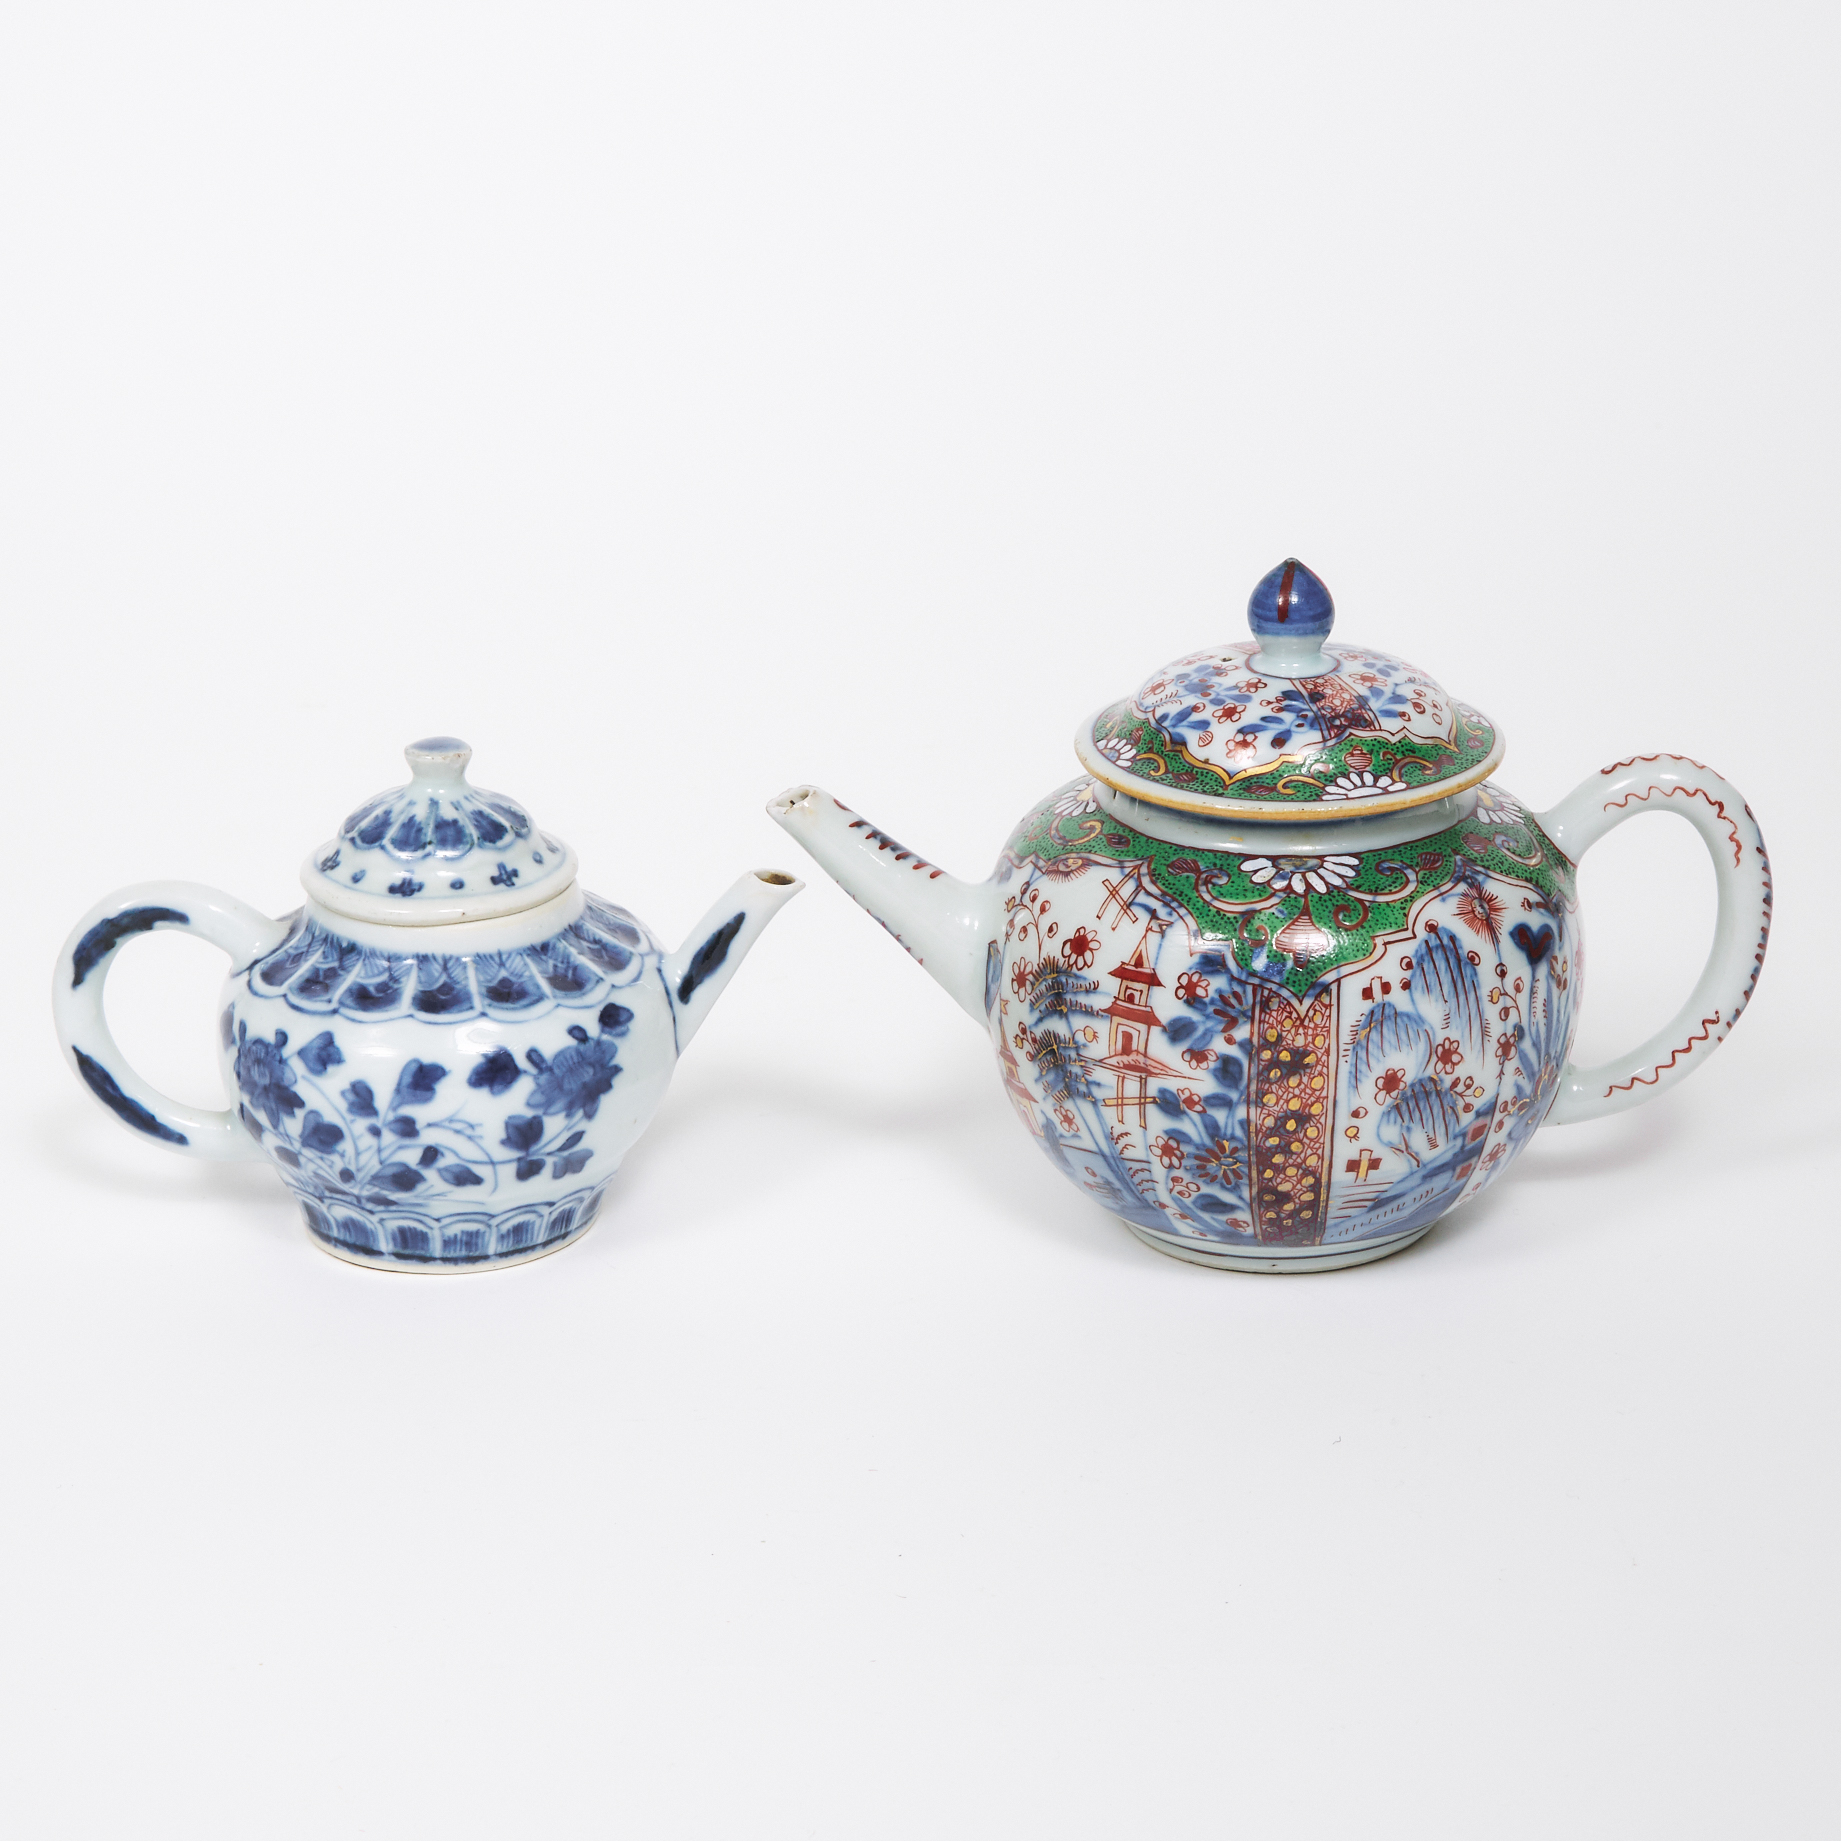 Two Rare Chinese Export Lidded Teapots, Qianlong Period